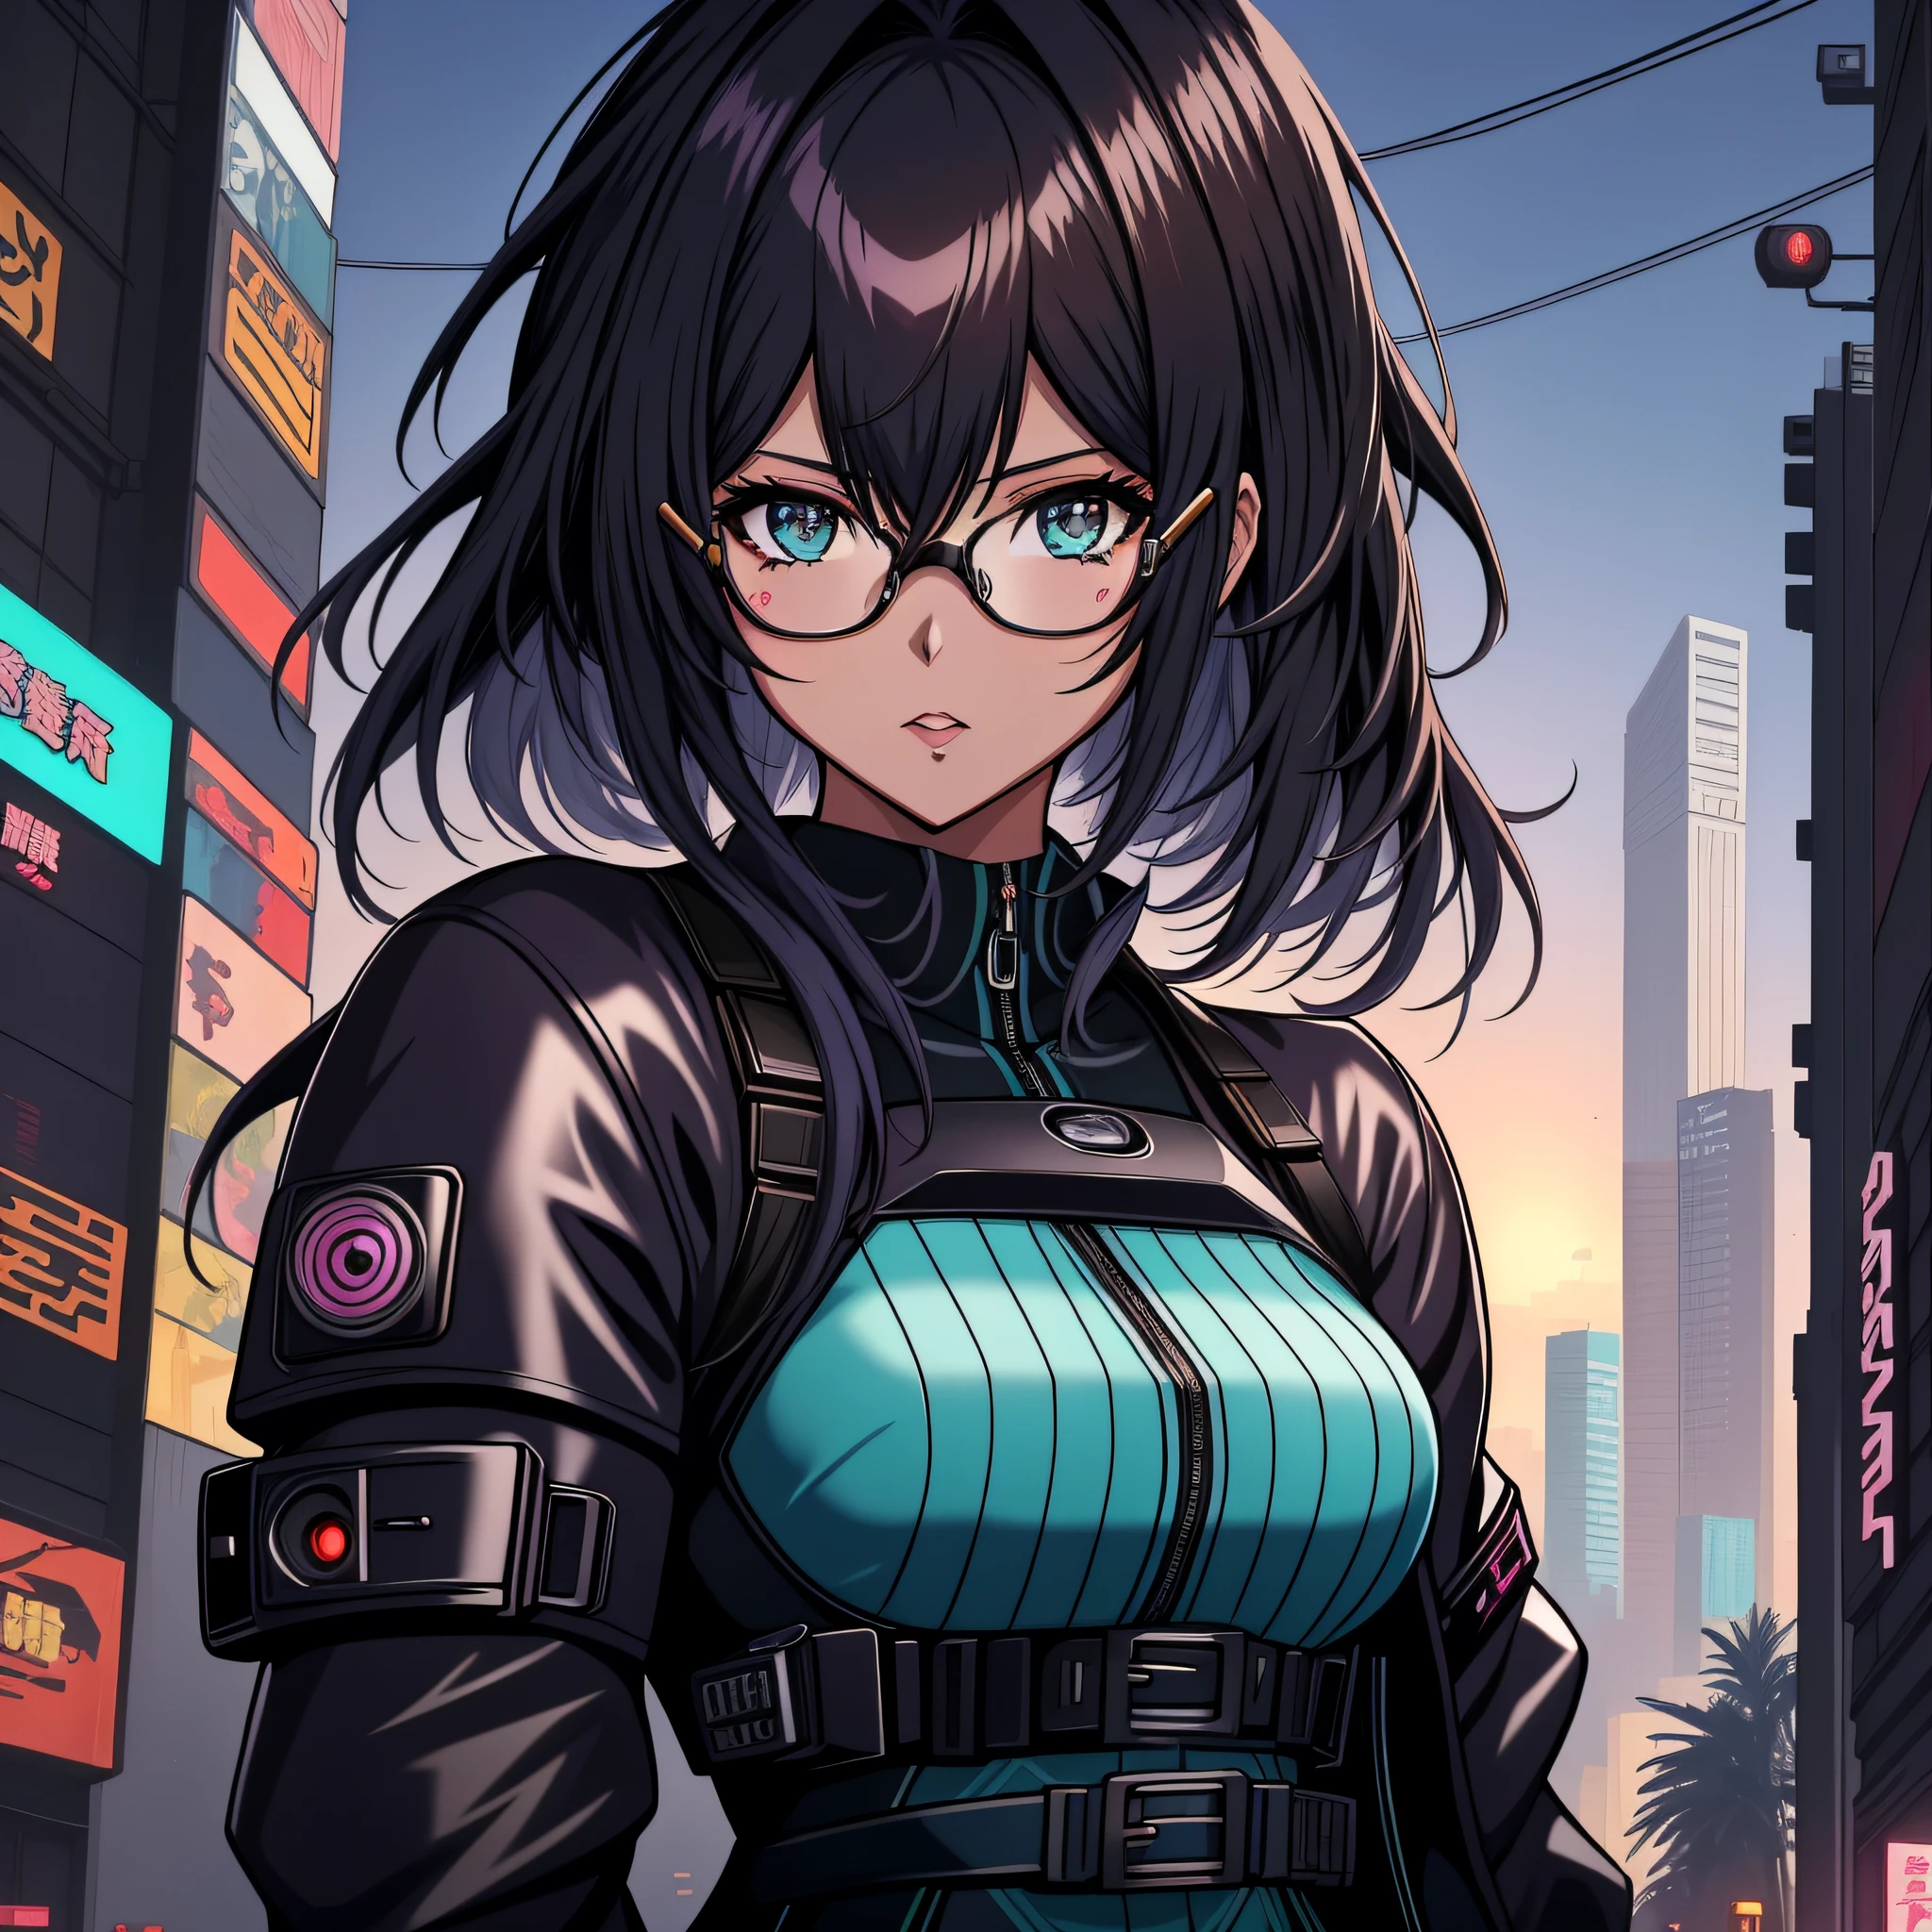 Anime - imagem de estilo 1mulher com olhos azuis e Bblack hair, Bblack hair, thick eyebrow, face of a 27 year old woman, 27 year old young man, cloused mouth, fully body, cyberpunk anime art, (cloused mouth: 1.5), (double eyelid), (Bblack hair: 1.3) wearing dress, digital cyberpunk anime art, cyberpunk anime art, range murata and artgerm, eyeglass, futuristic clothing, (whole body: 1.5), wearing dress, stylish dress, Technological dress, transparent spectacle lenses, 极其详细的Artgerm, modern cyberpunk anime, artgerm and atey ghailan, artgerm and genzoman, cloused mouth